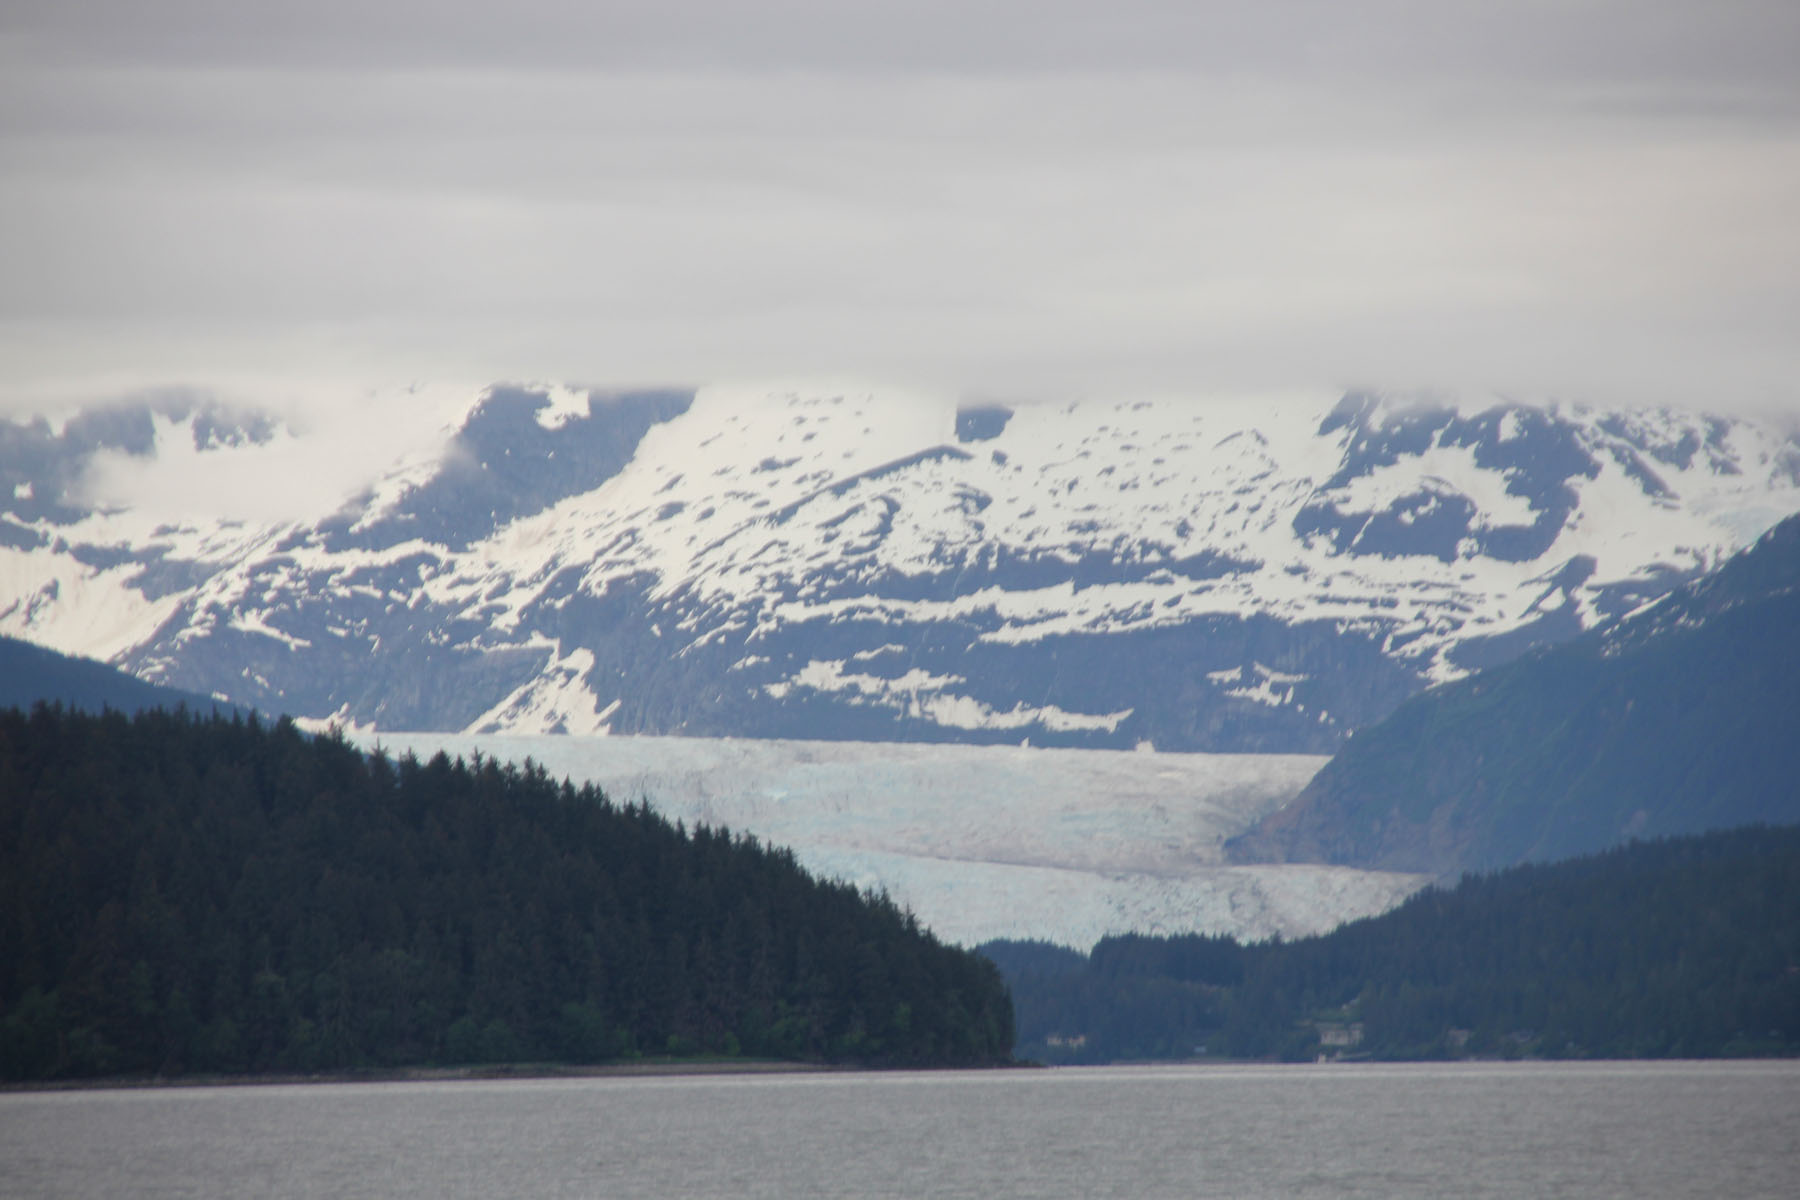 Close-up of the Mendenhall Glacier from our whale-watch cruise.